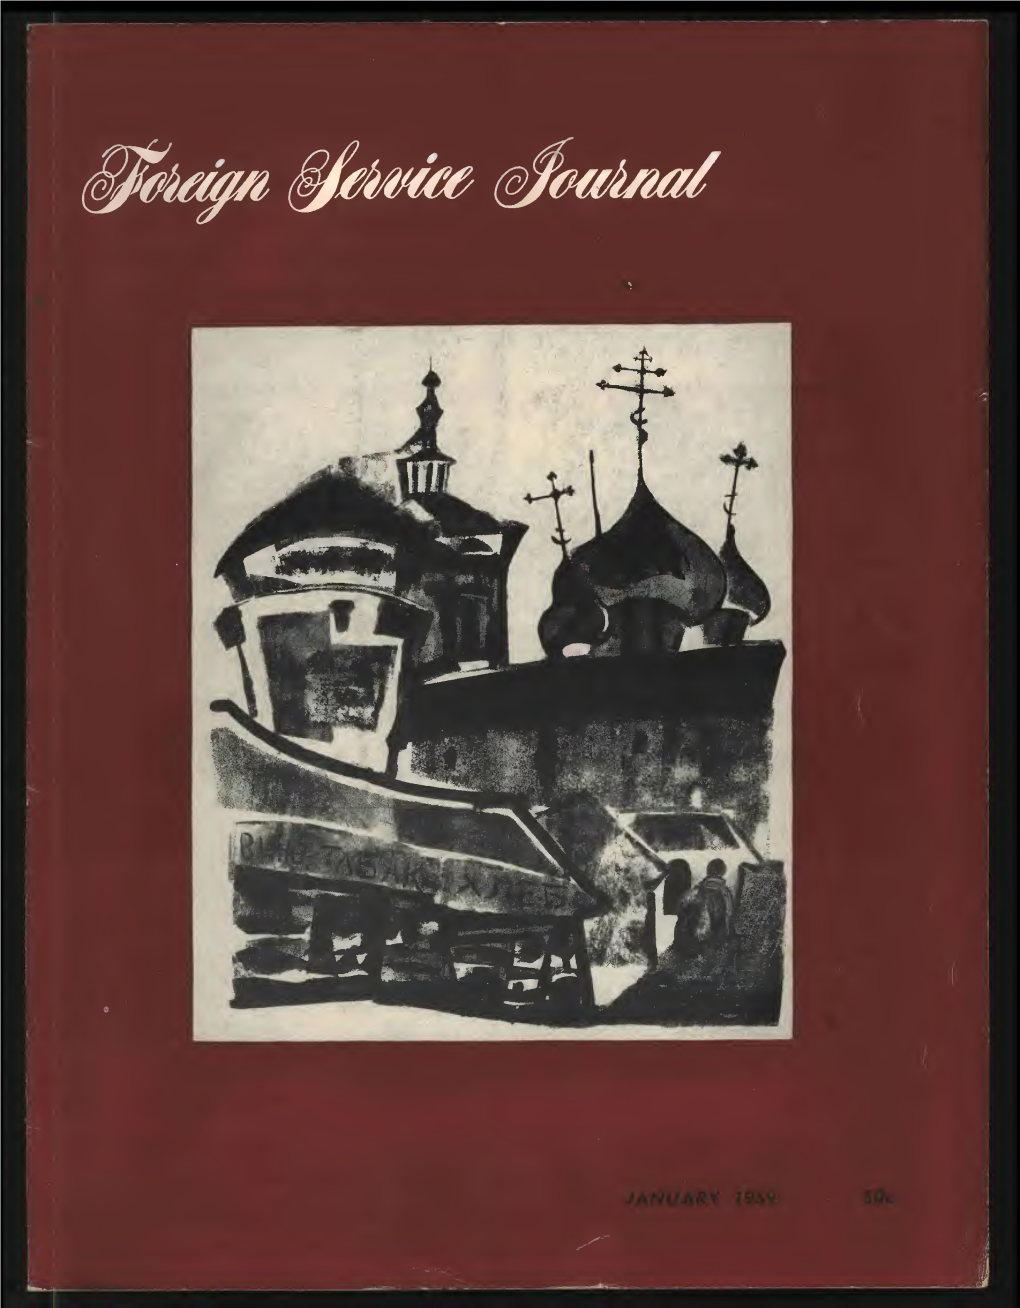 The Foreign Service Journal, January 1959